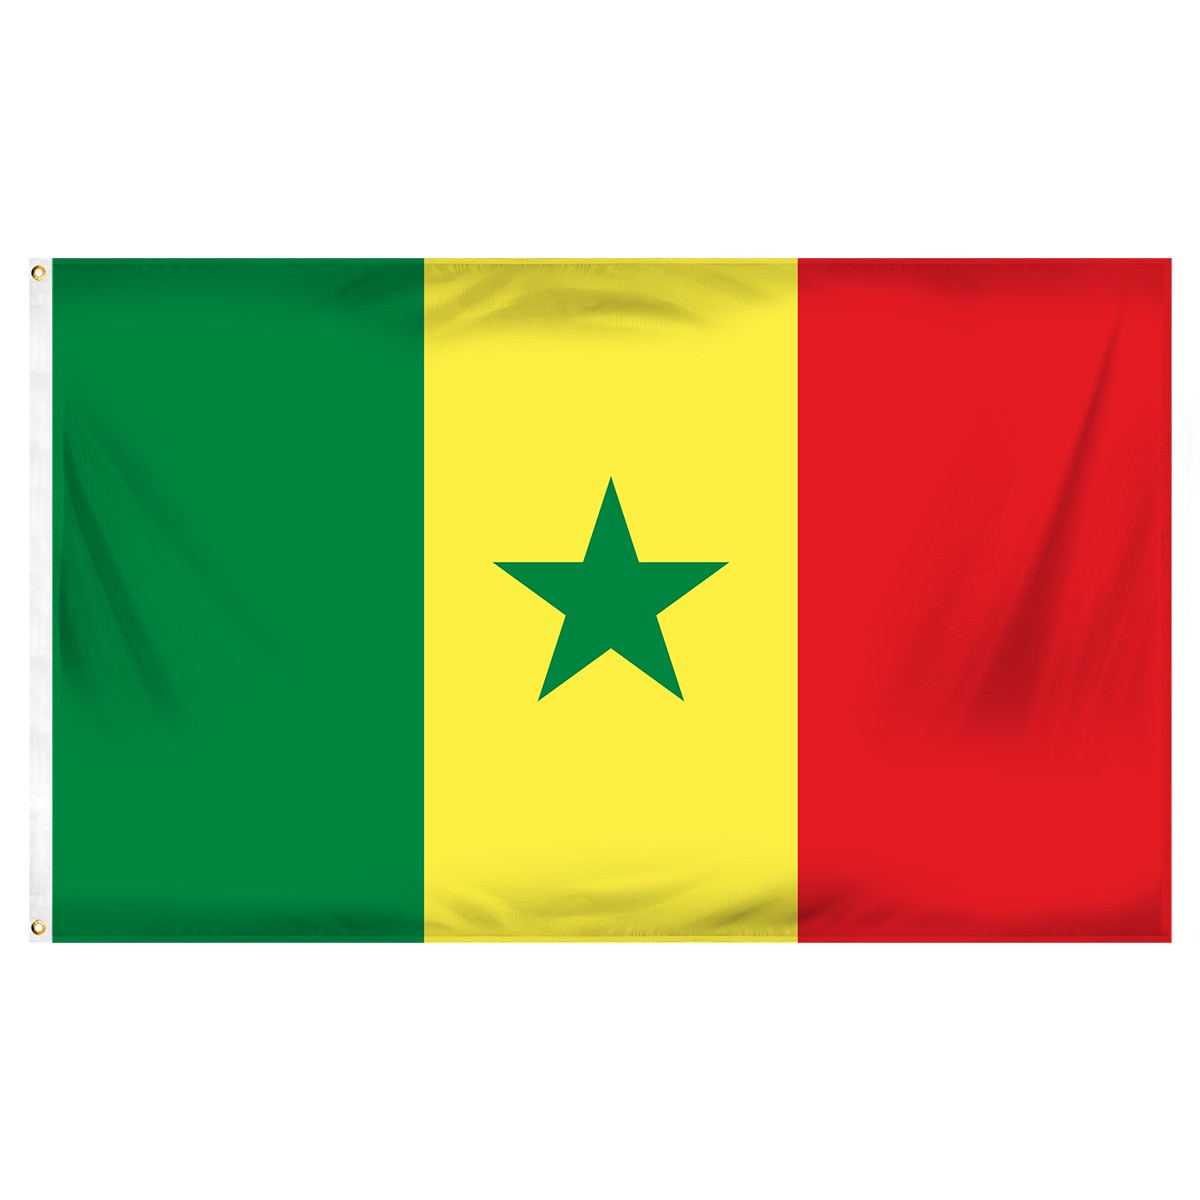 Senegal Submit Flags and Flags